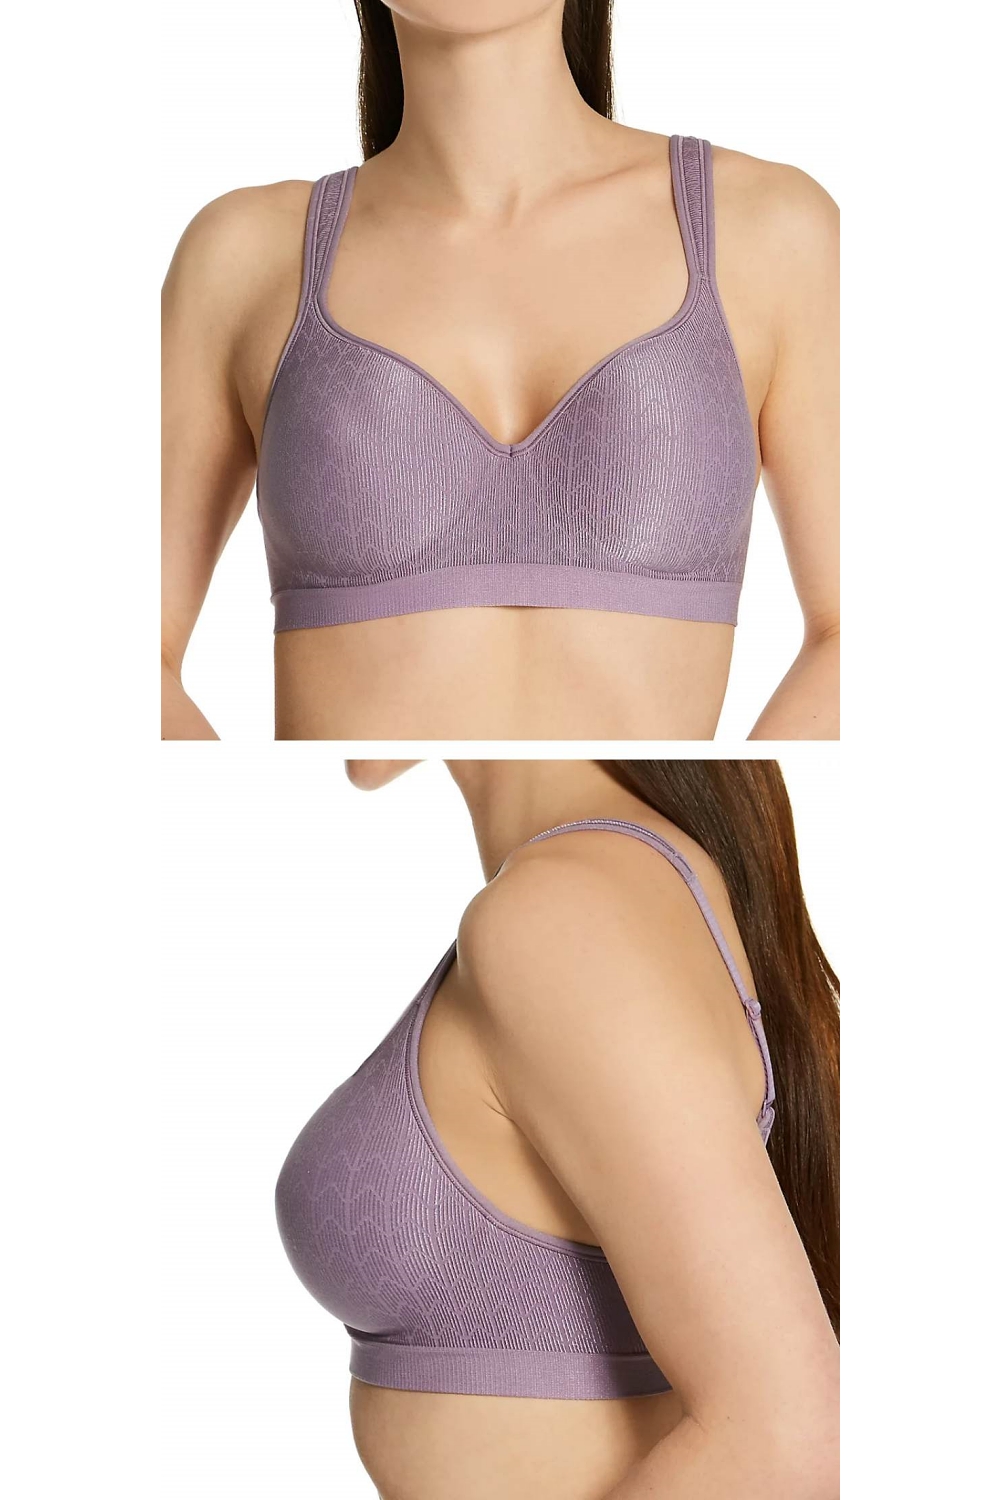 finding the right bra size